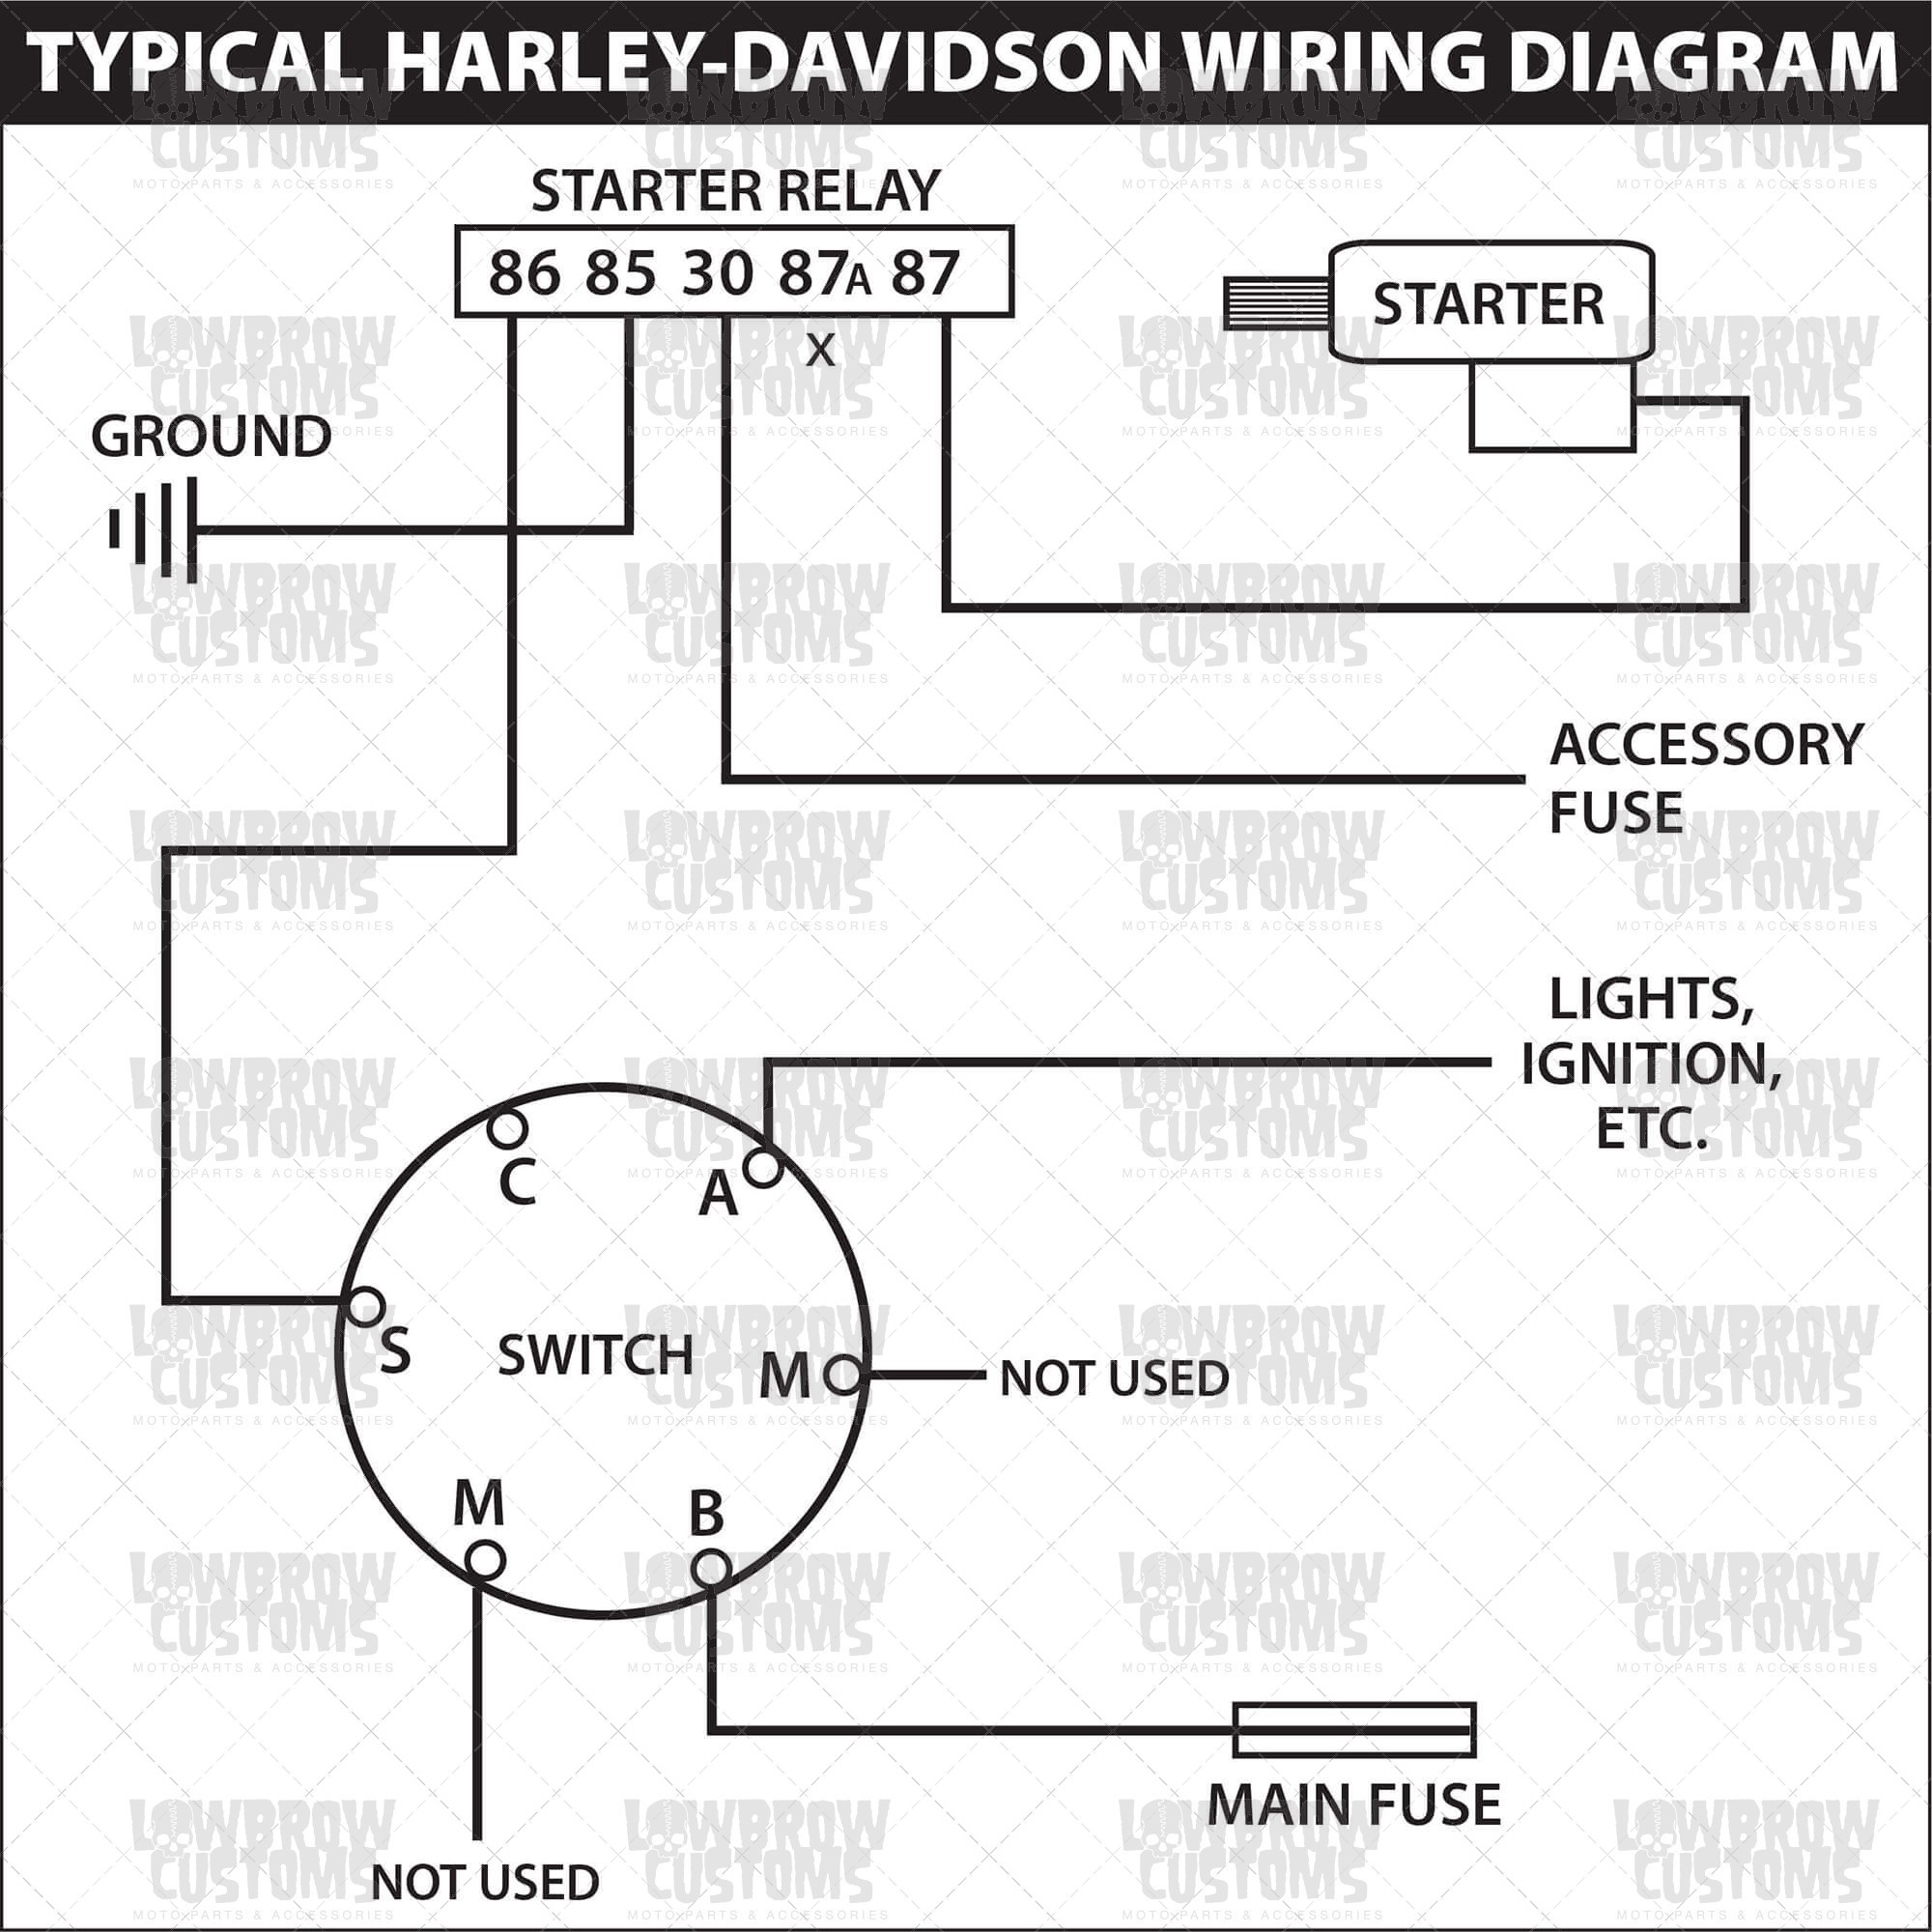 Wiring Diagram for Universal Ignition Switch Fresh Wiring Diagram for Universal Relay New Universal Ignition Switch